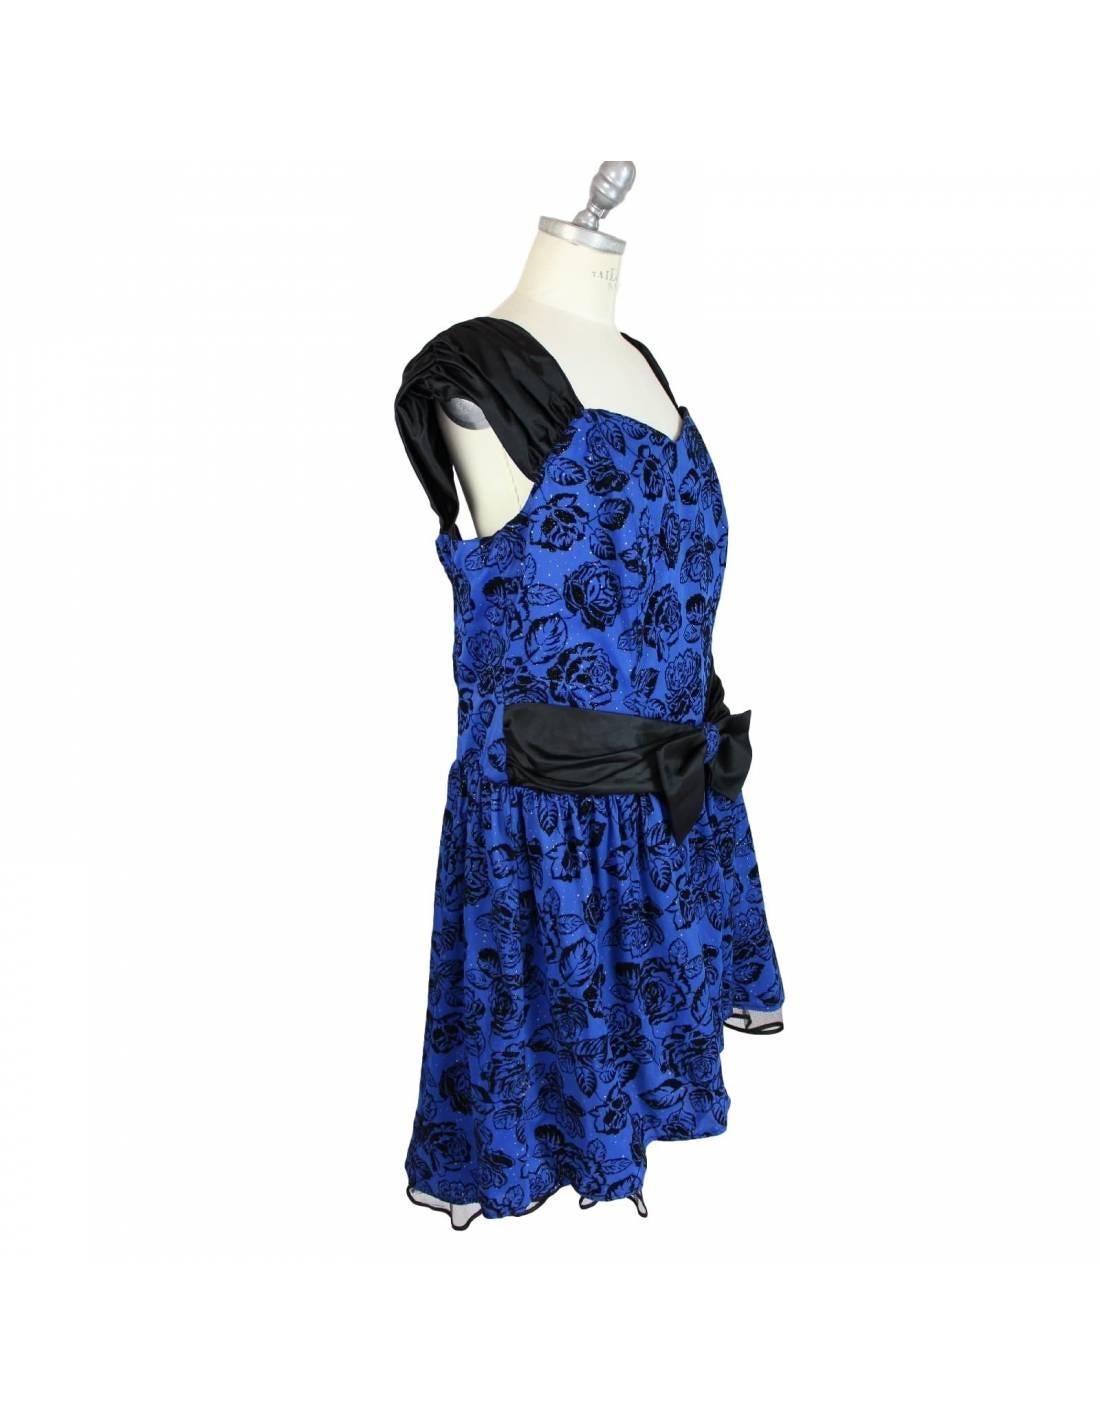 Oversized vintage sartoriale dress 80s rockabilly style, color blue background designs. Cocktail party dress. Short sleeves, floral designs and black bow at the waist. The balloon skirt is made of tulle and is longer behind.

Made in Italy.